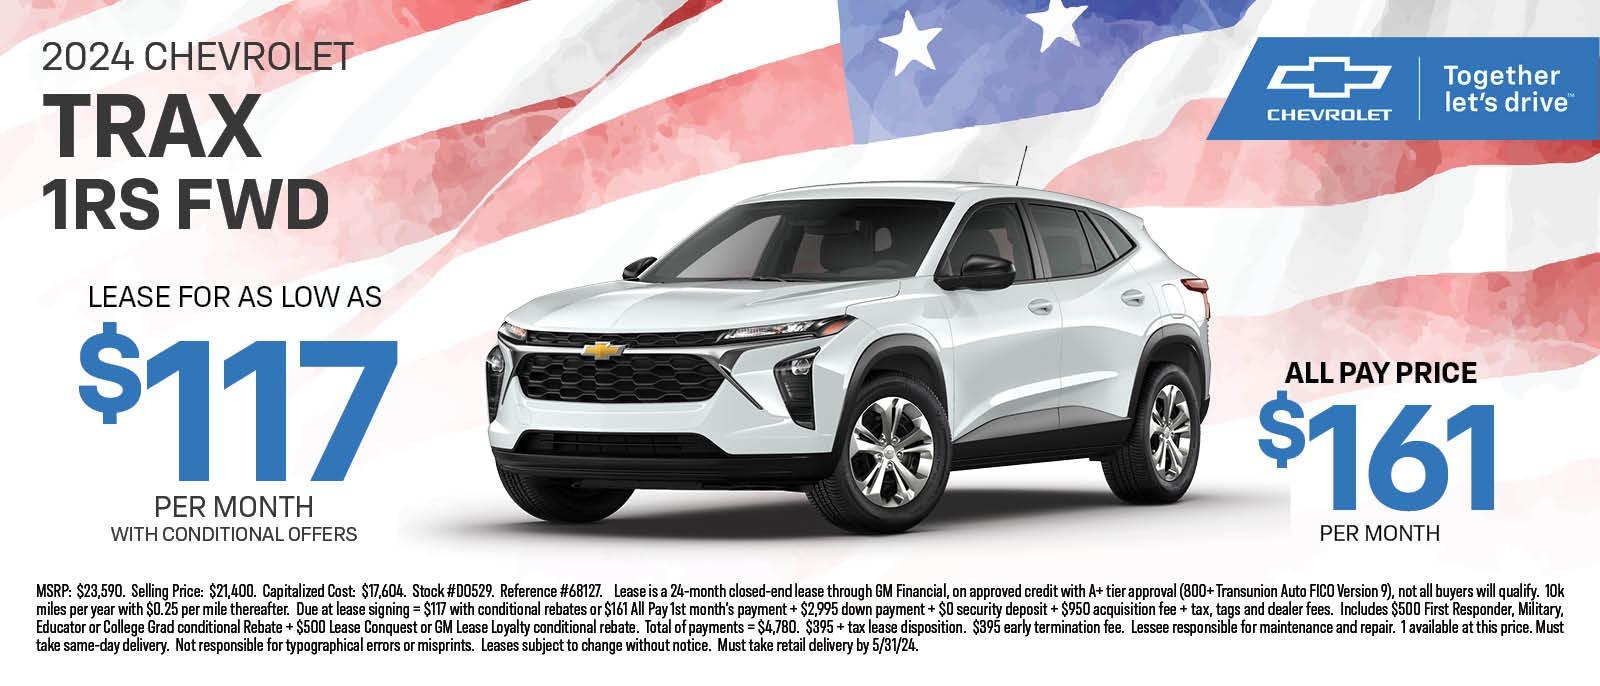 2024 CHEVROLET TRAX 1RS FWD LEASE FOR AS LOW AS $117 PER MONTH WITH CONDITIONAL OFFERS